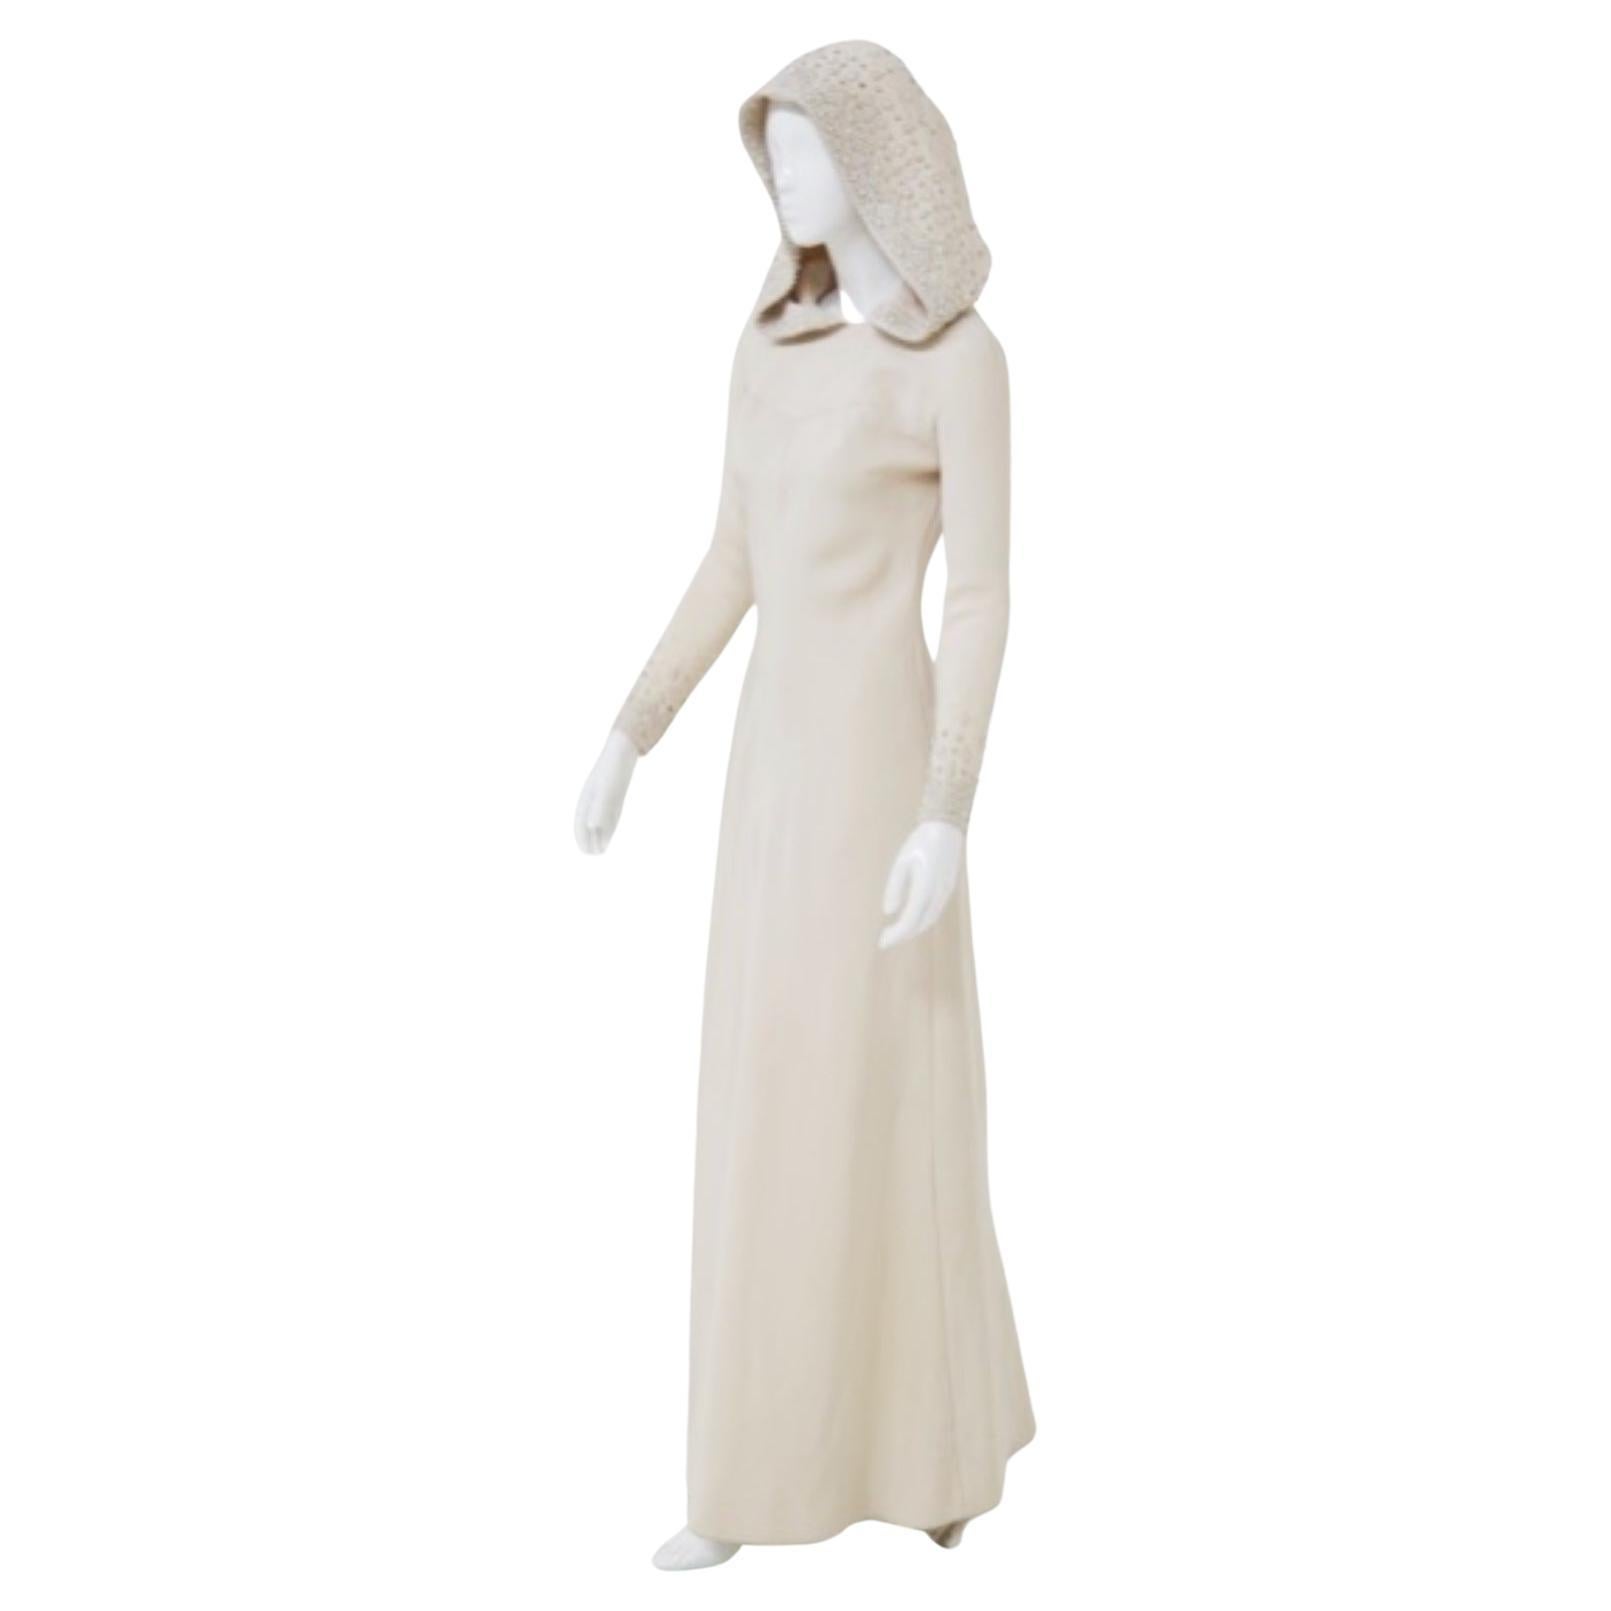 Mazzuchelli Vintage Sartorial Hooded Dress w Beading For Sale